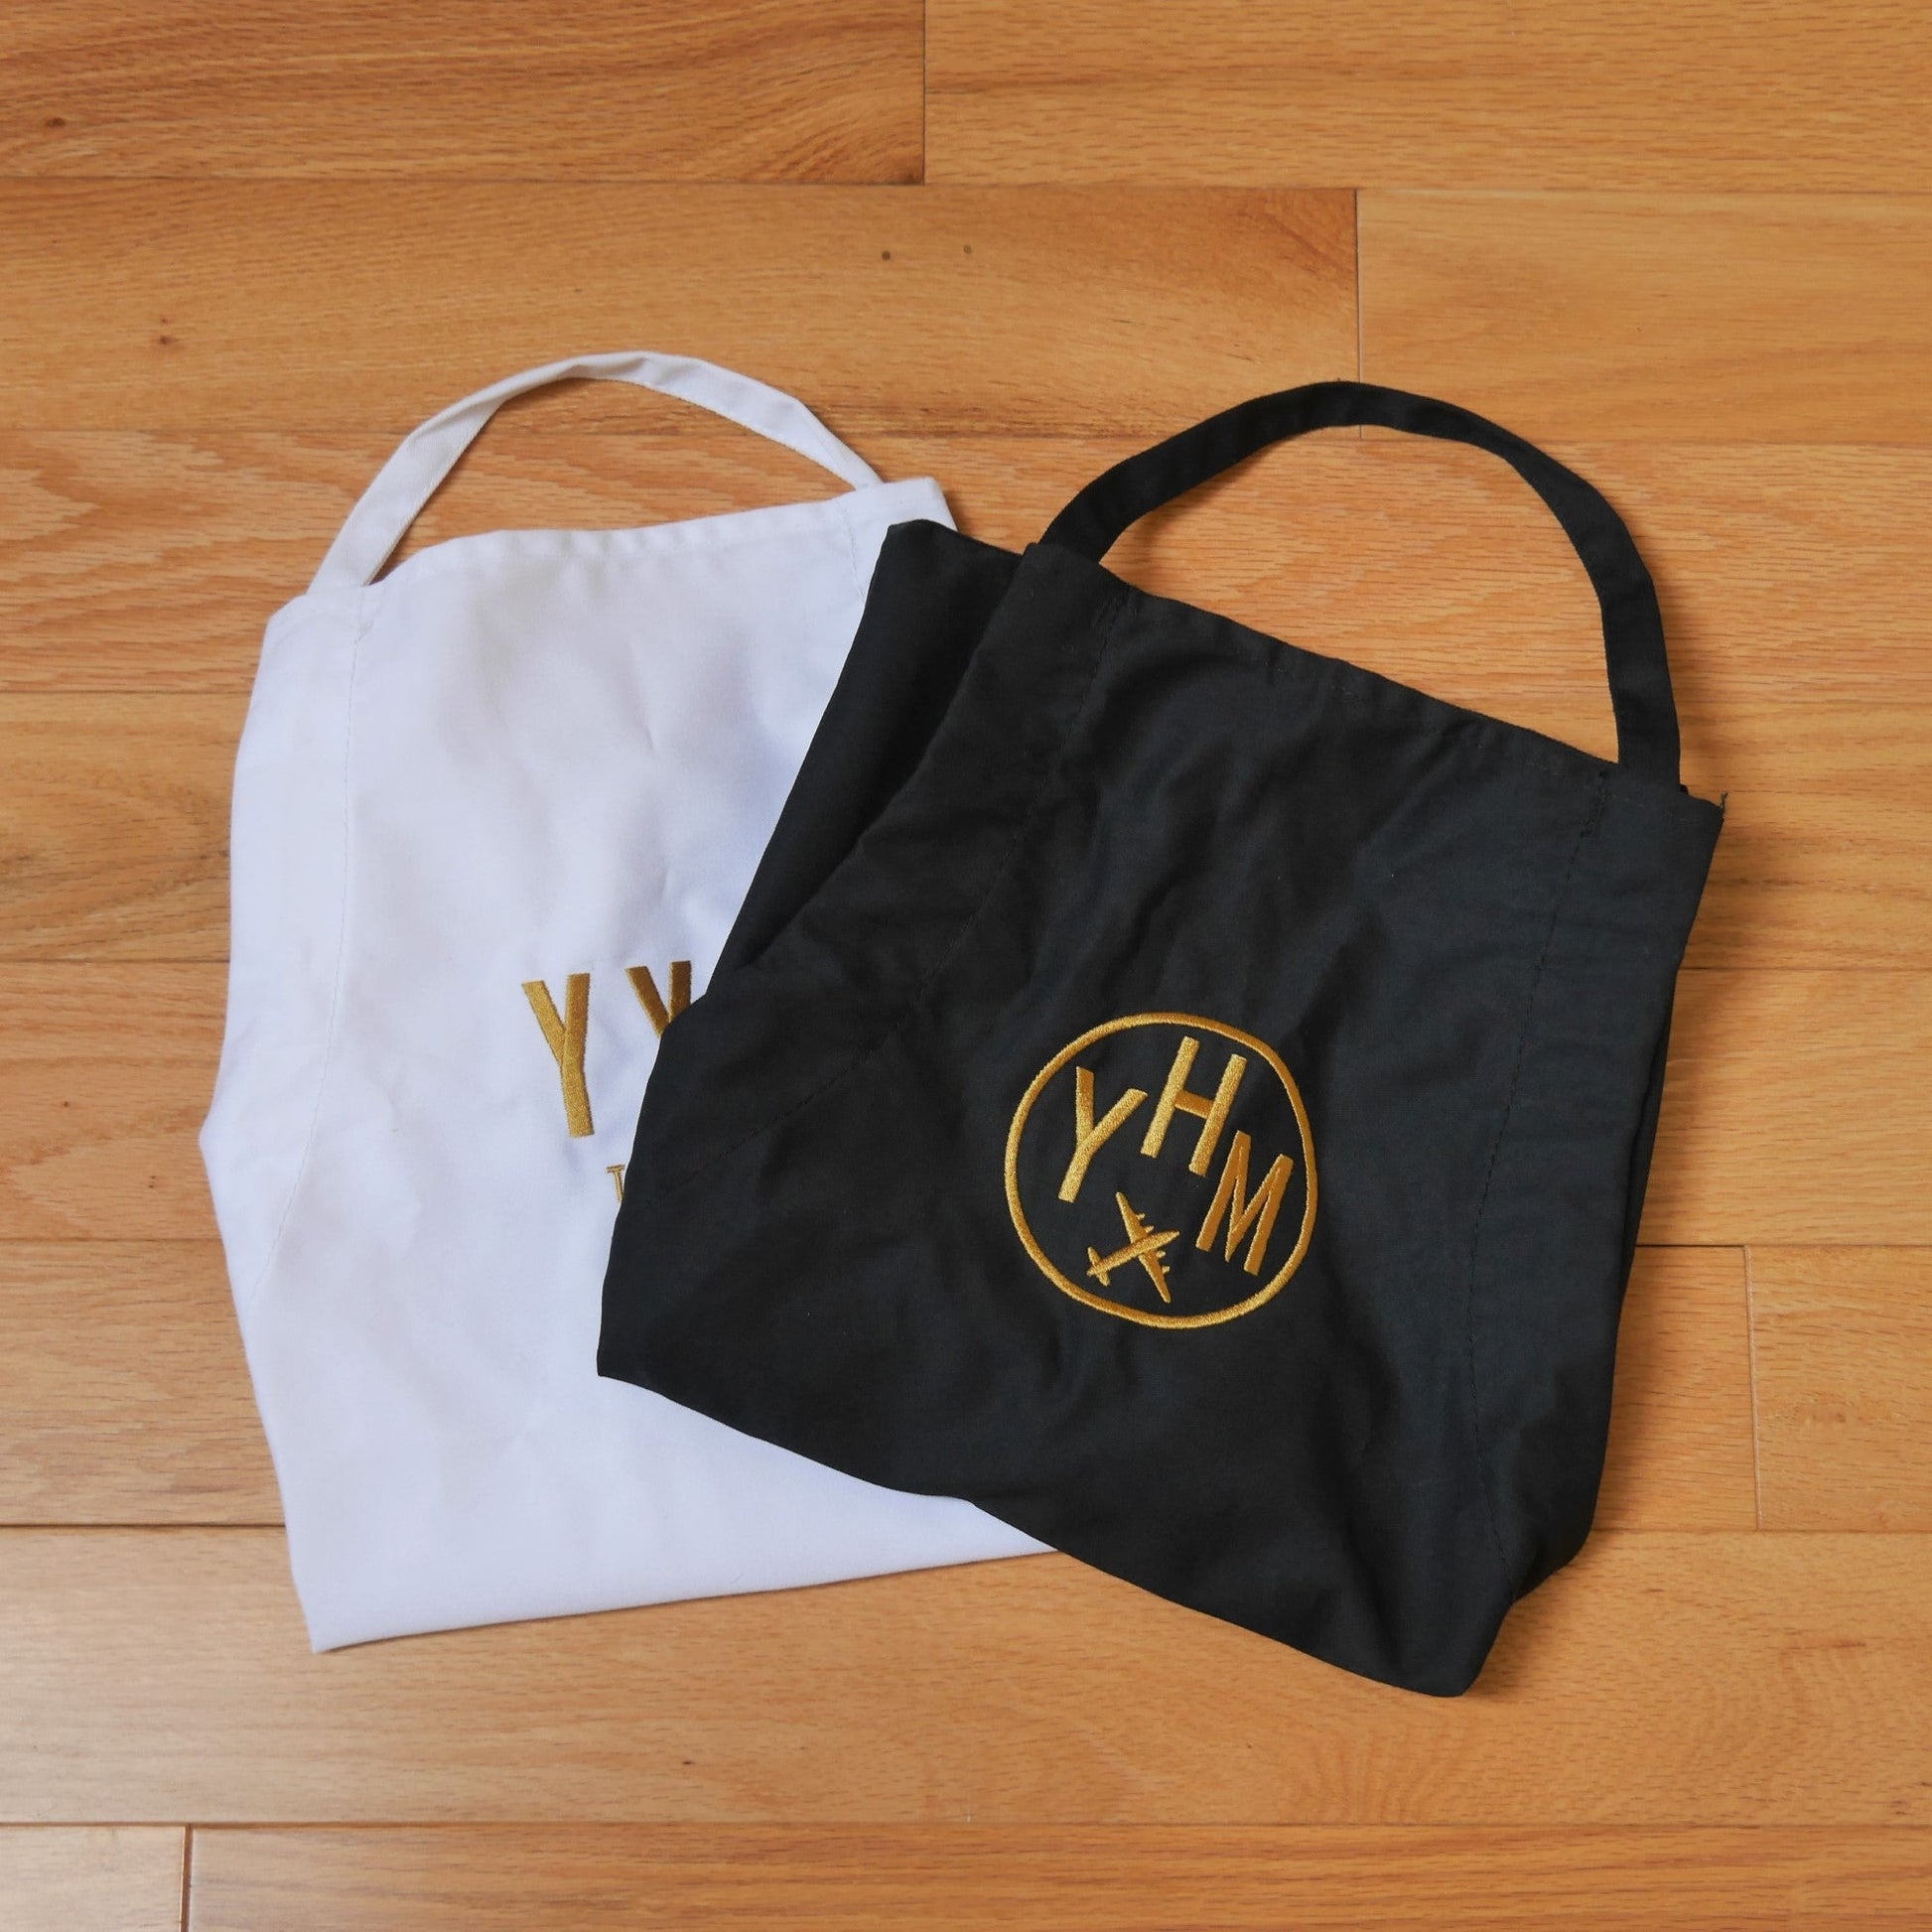 City Embroidered Apron - Old Gold • MSP Minneapolis • YHM Designs - Image 14